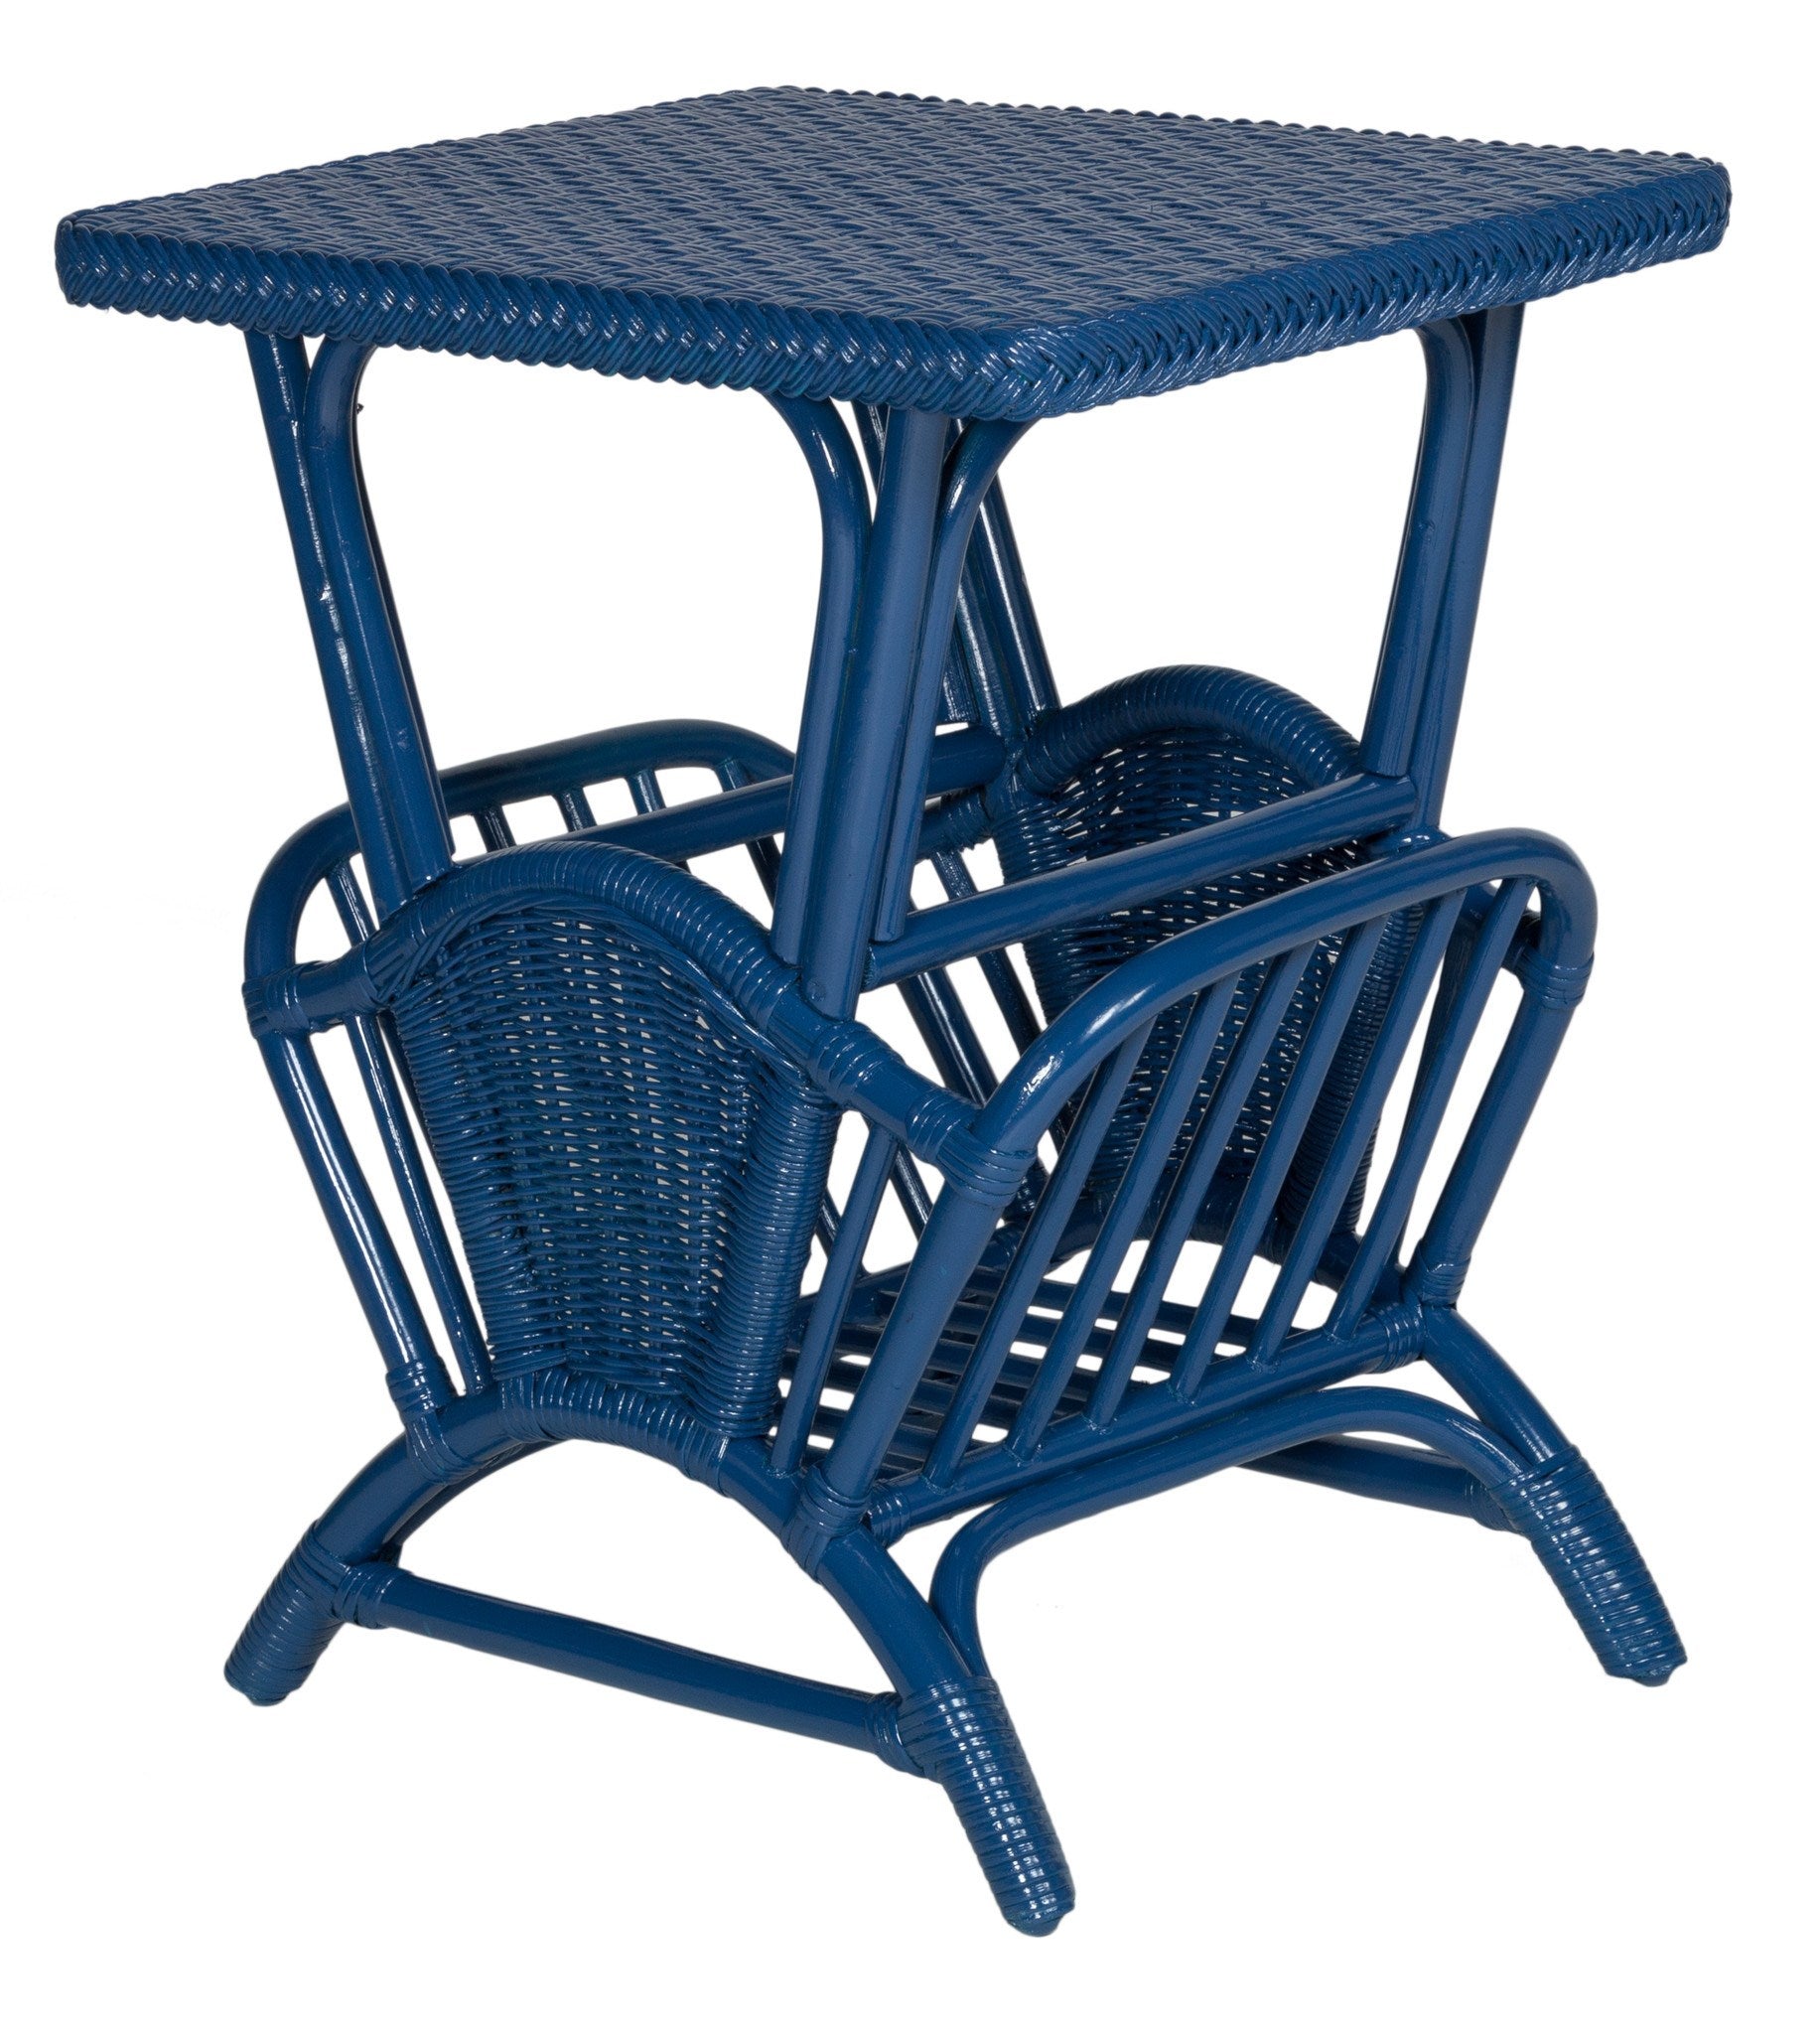 Designer Wicker & Rattan By Tribor Harbor Front Occasional Magazine Table Accessory - Rattan Imports